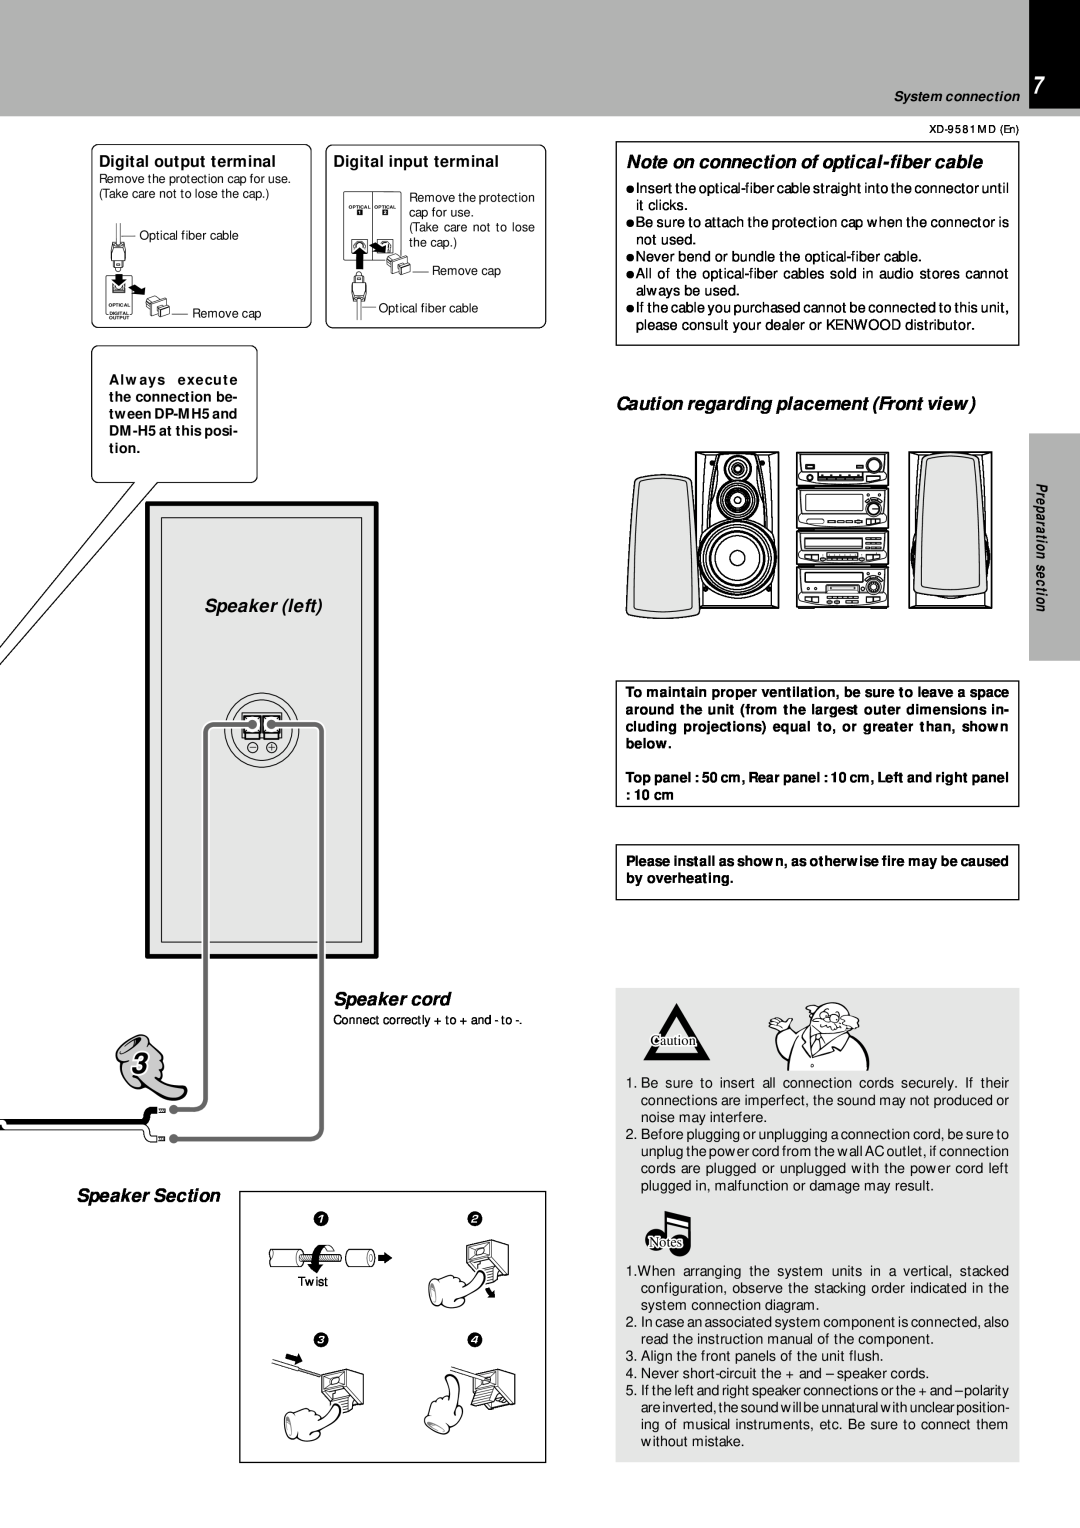 Kenwood XD-9581MD Note on connection of optical-fibercable, Caution regarding placement Front view, Speaker left 